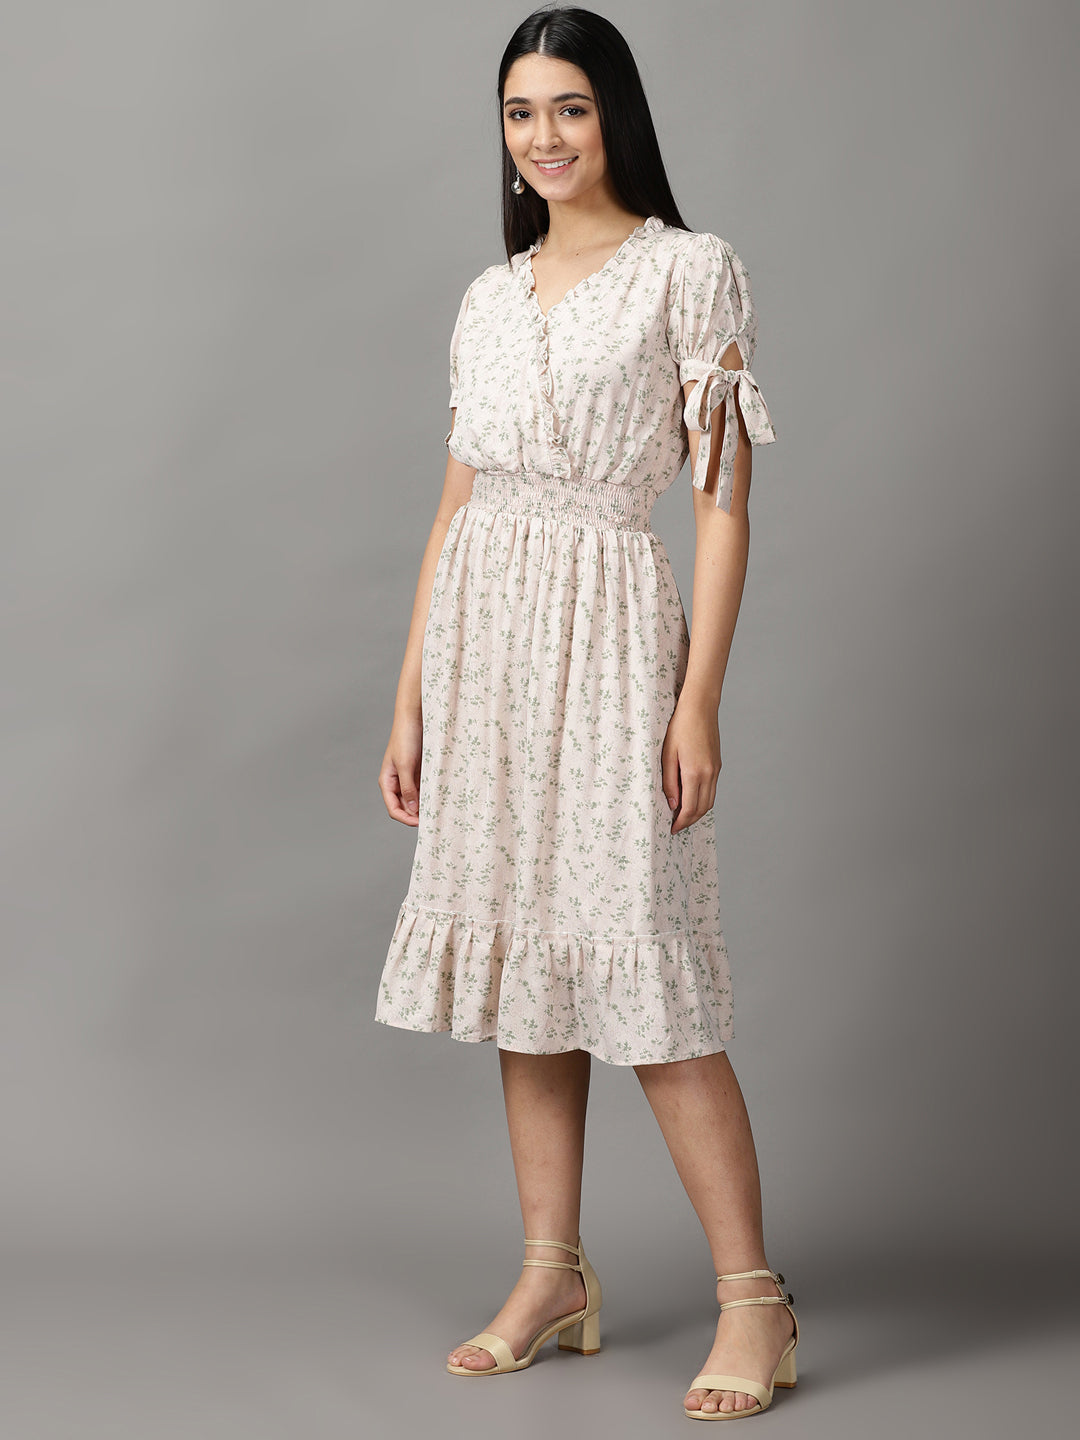 Women's Cream Floral Fit and Flare Dress